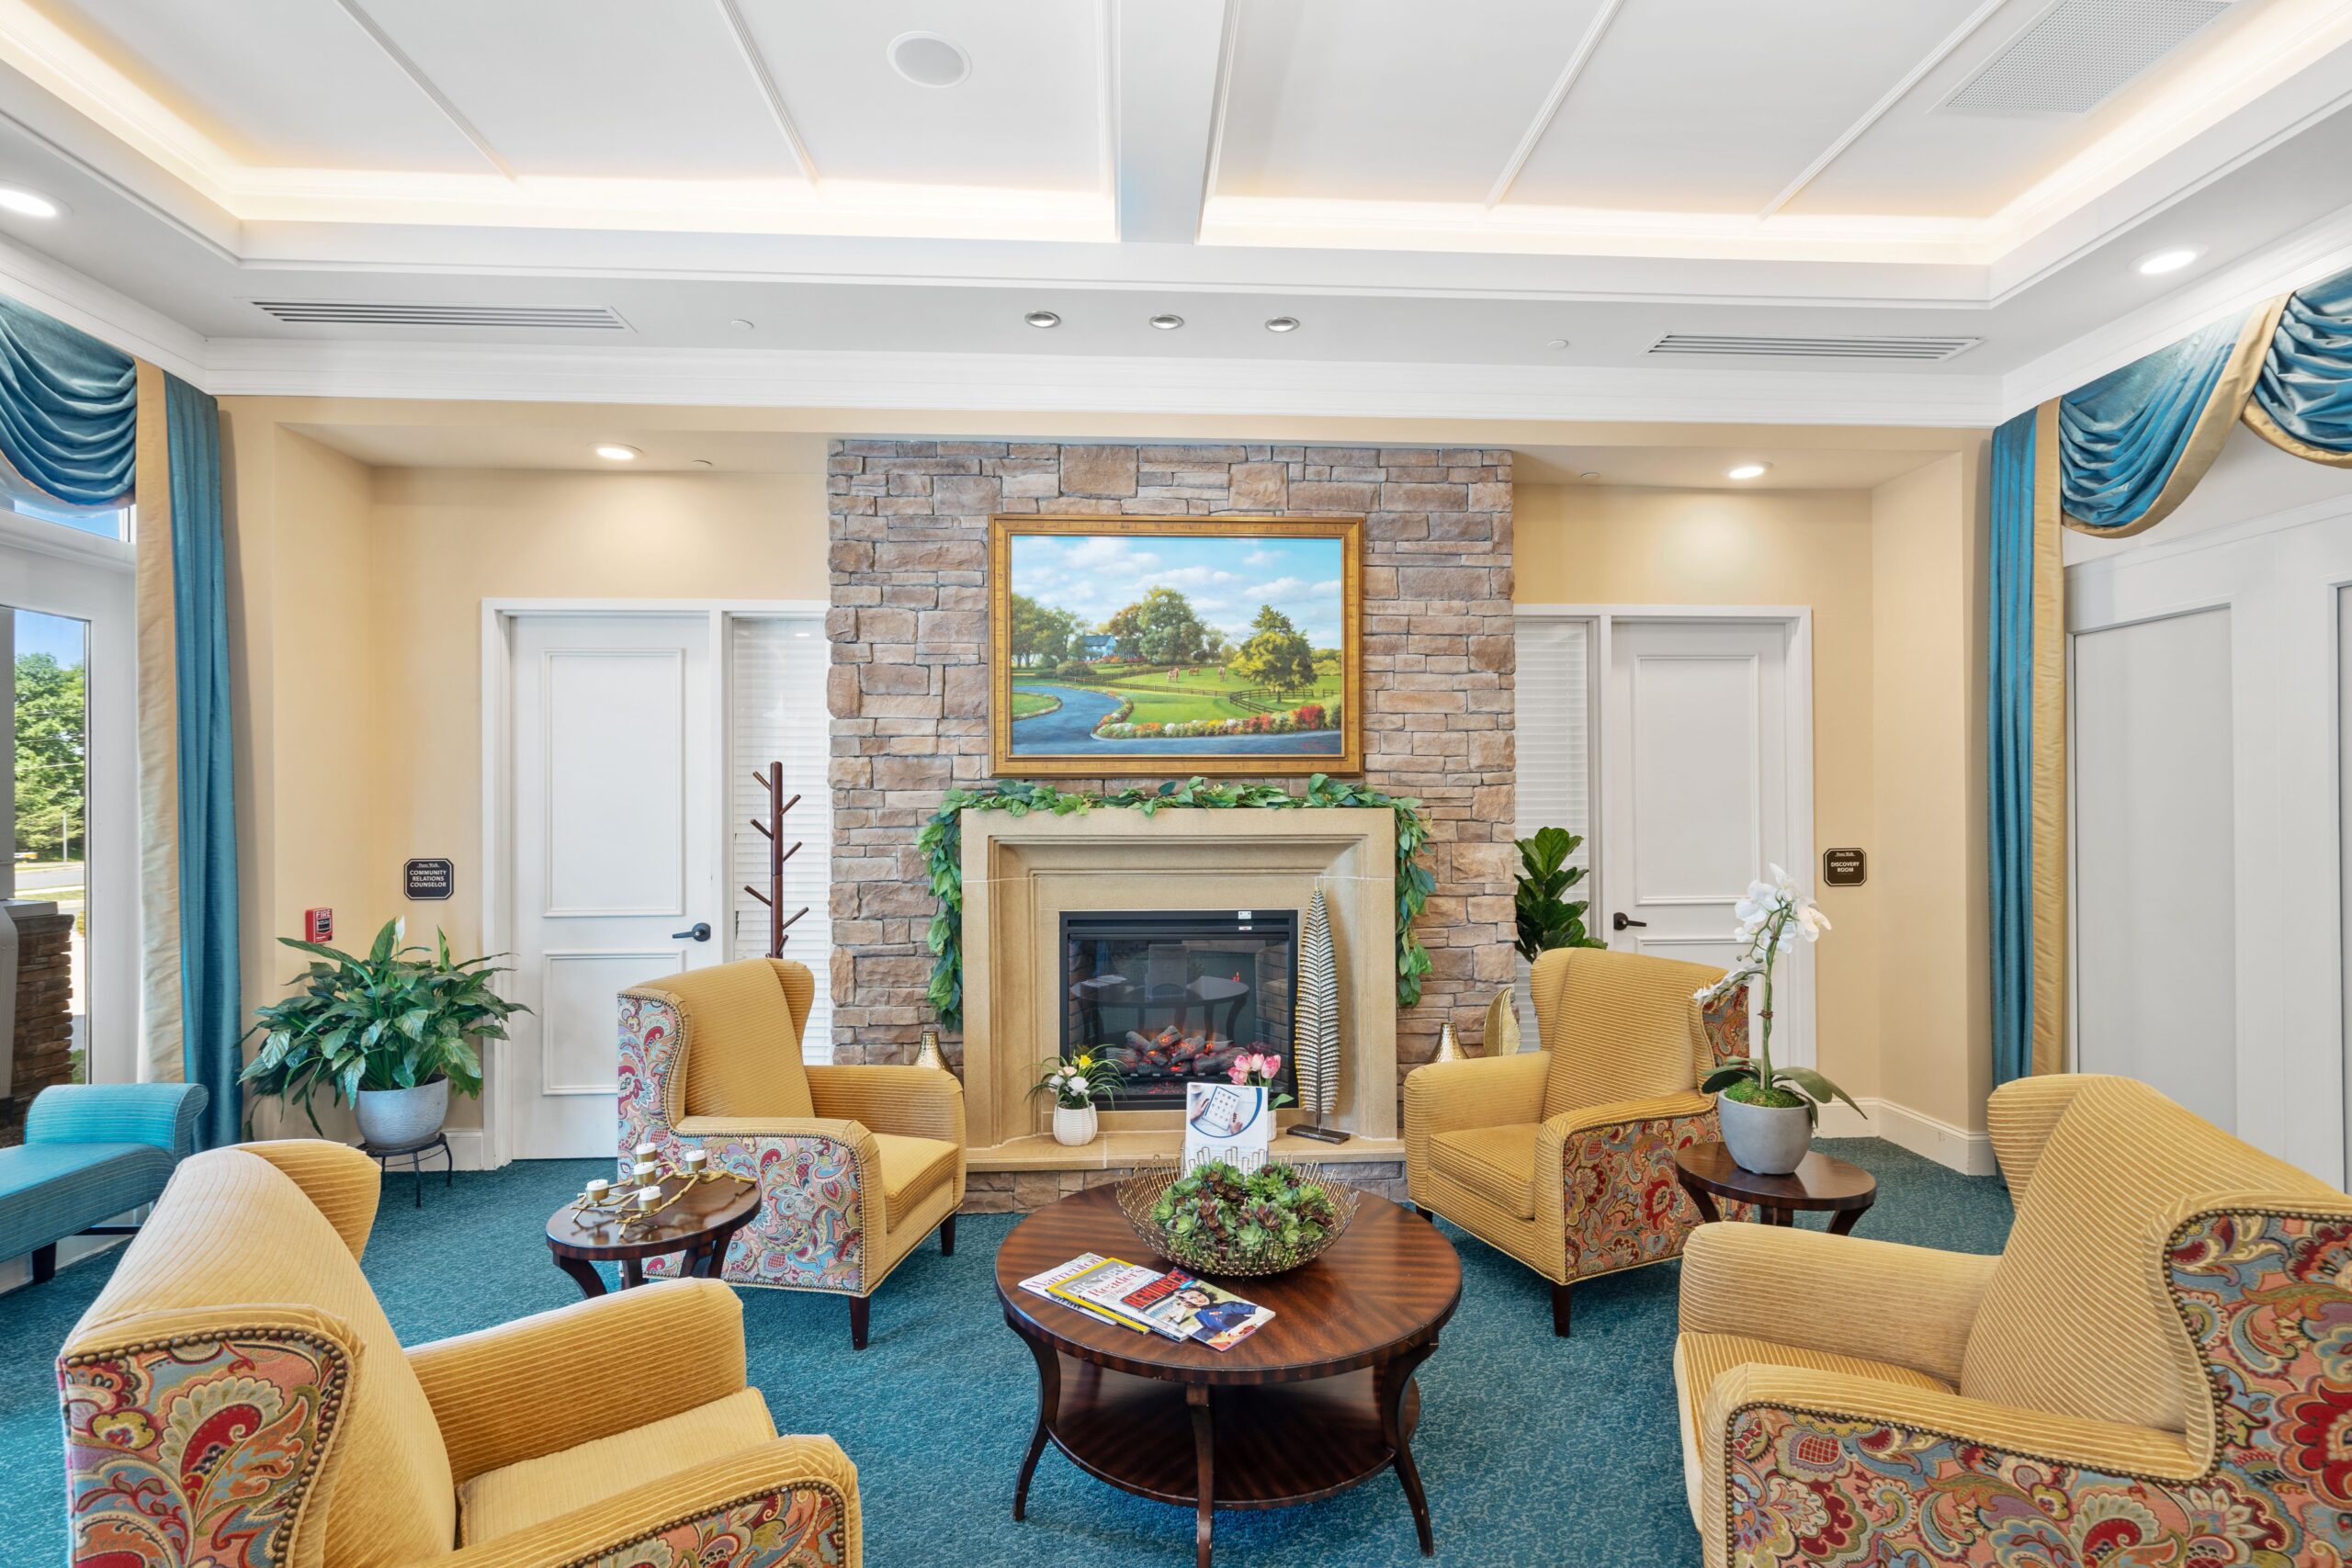 Lobby with sitting area and fireplace